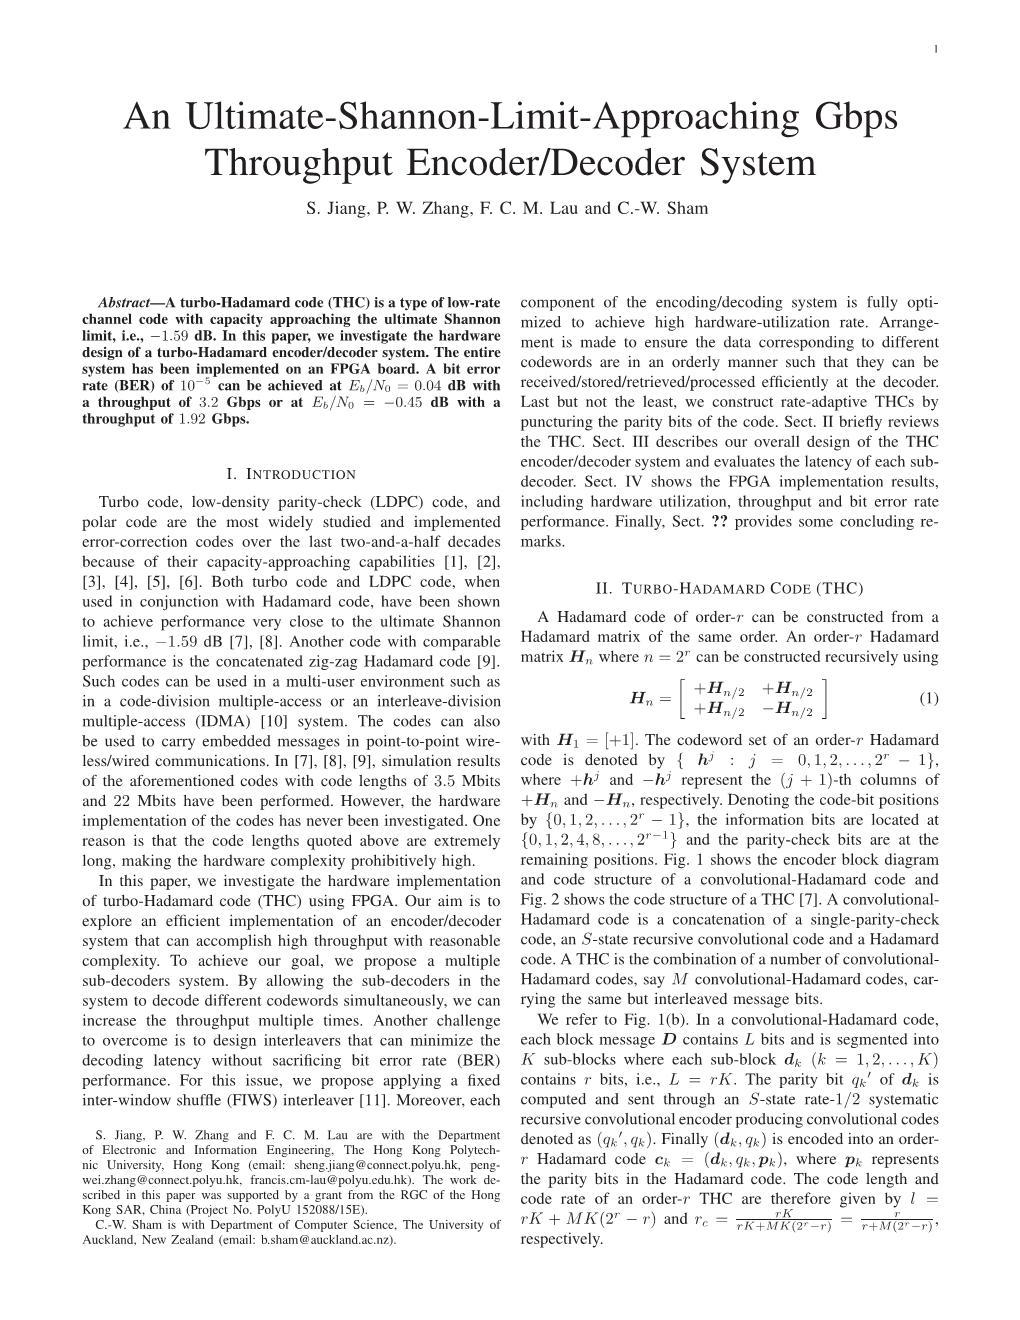 An Ultimate-Shannon-Limit-Approaching Gbps Throughput Encoder/Decoder System S